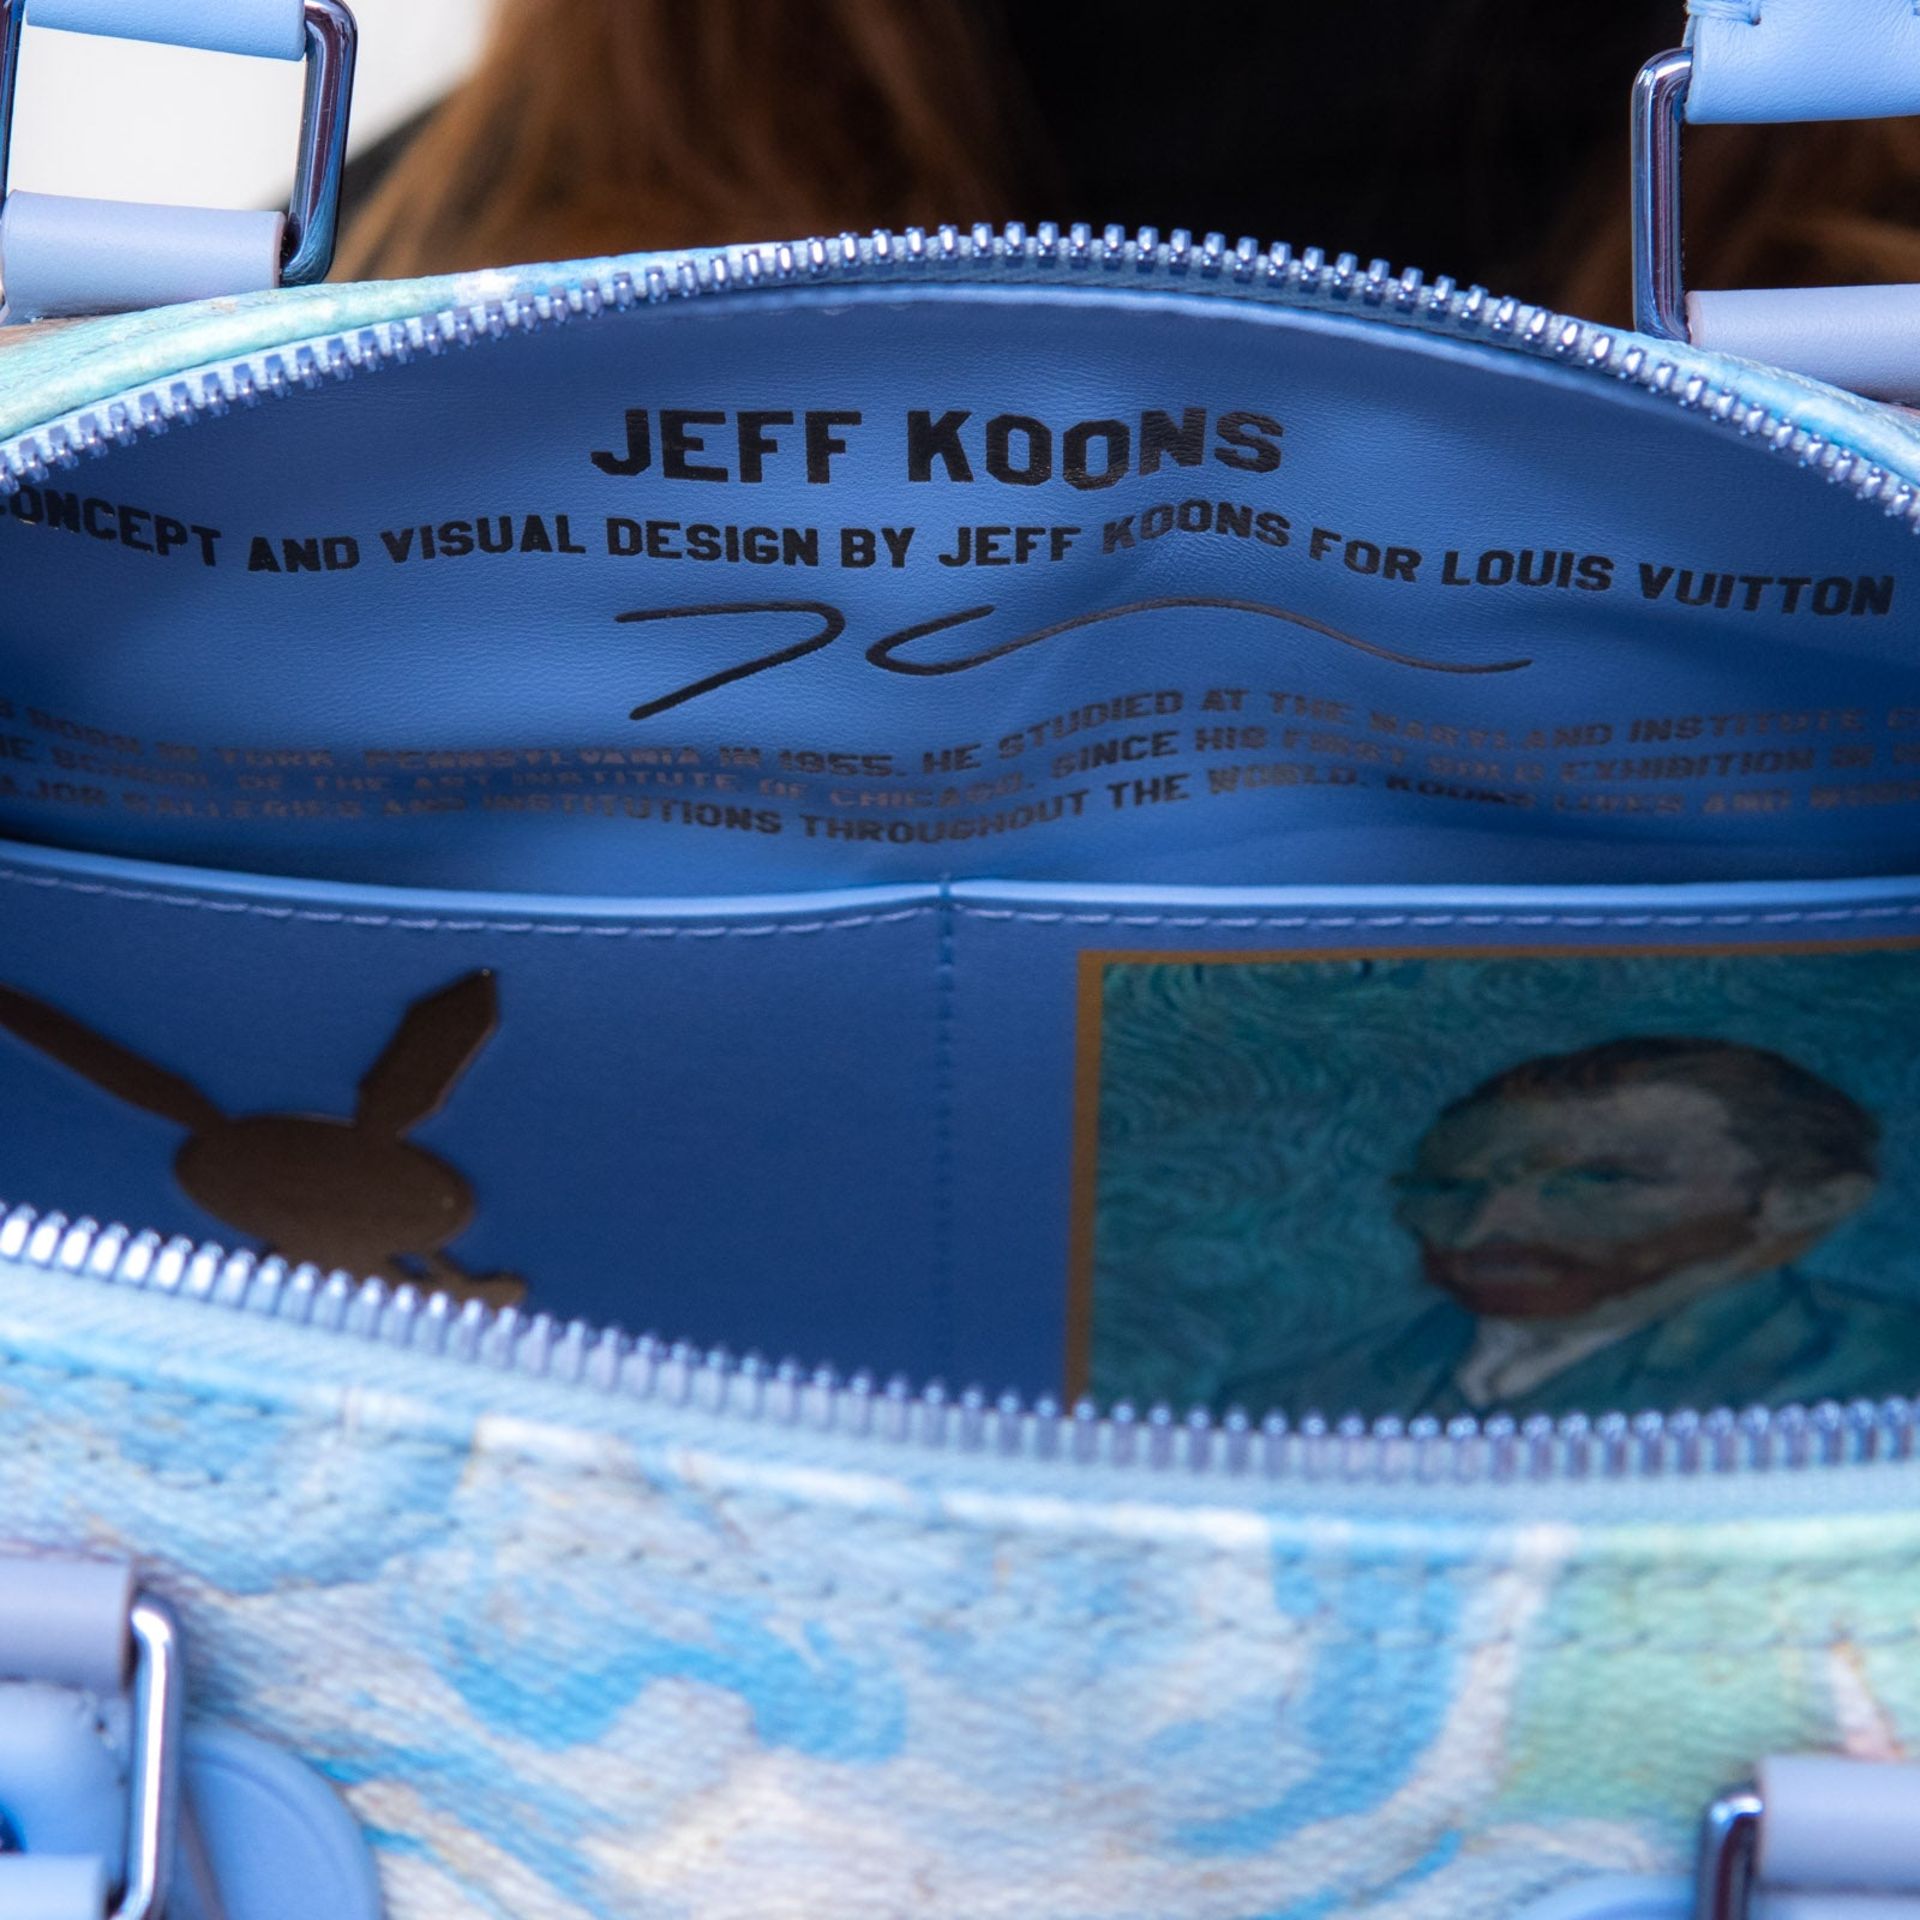 Louis Vuitton Limited Edition Lavender Speedy 30 Jeff Koons Van Gogh Masters Collection - Image 15 of 18